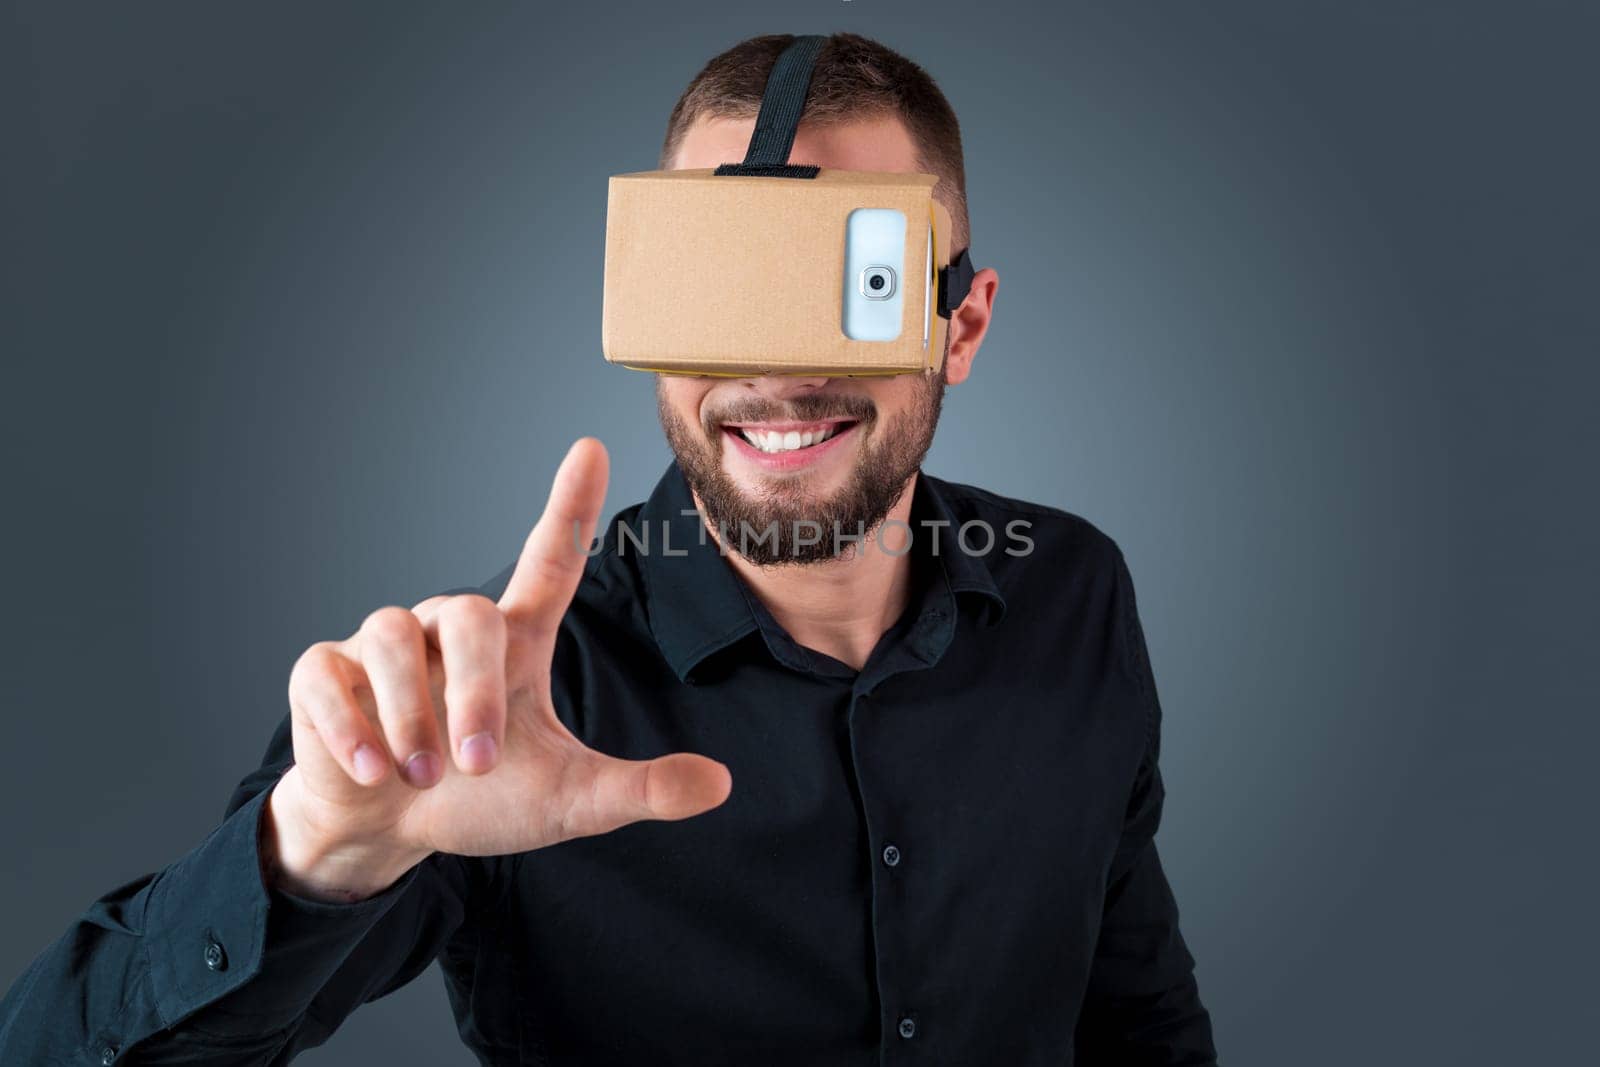 Excited young man using a VR headset glasses and experiencing virtual reality on grey blue background